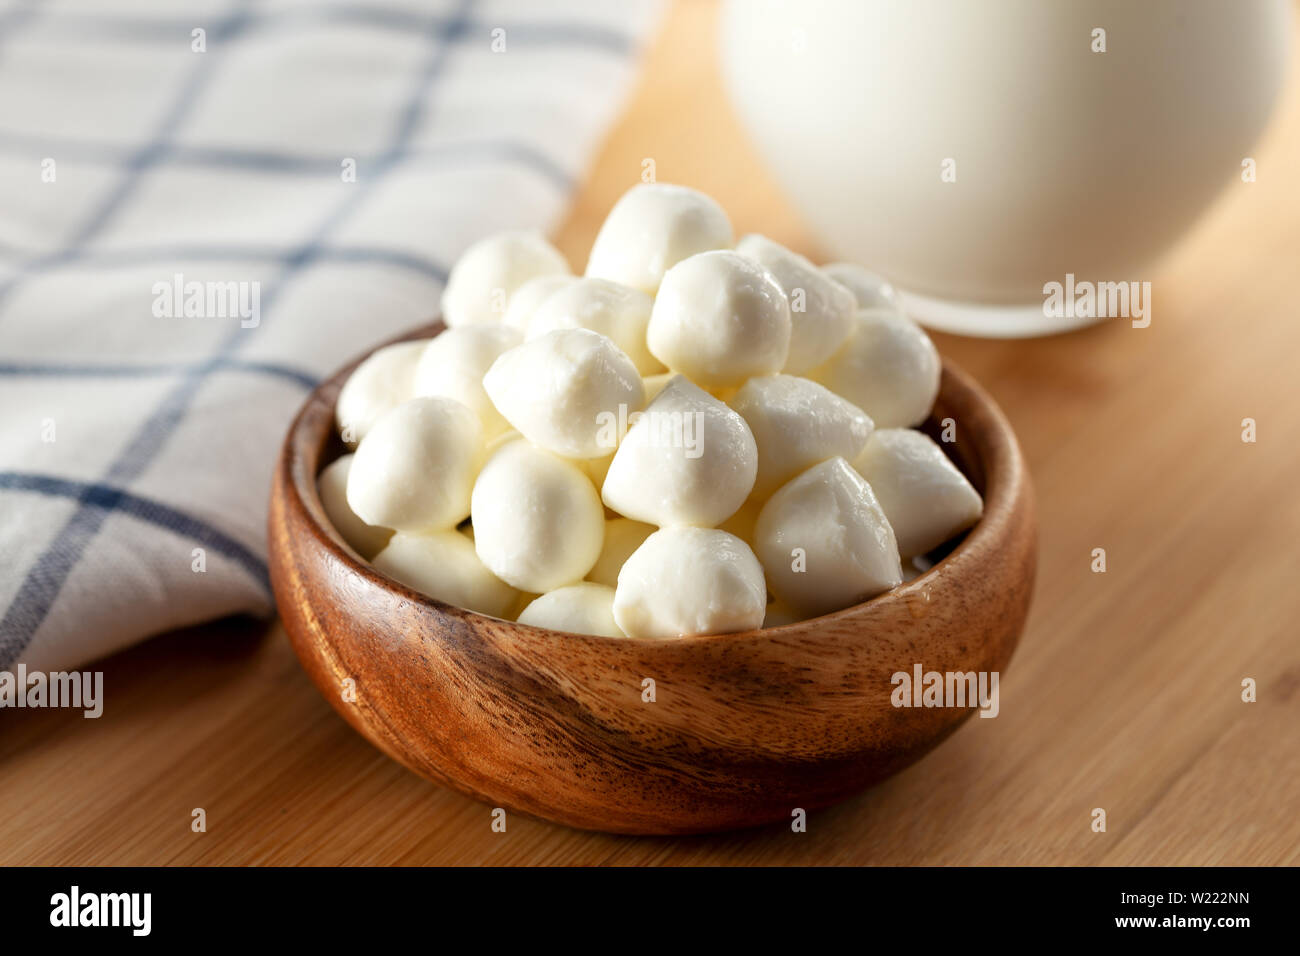 Mozzarella cheese balls in bowl and glass of milk on wooden background Stock Photo